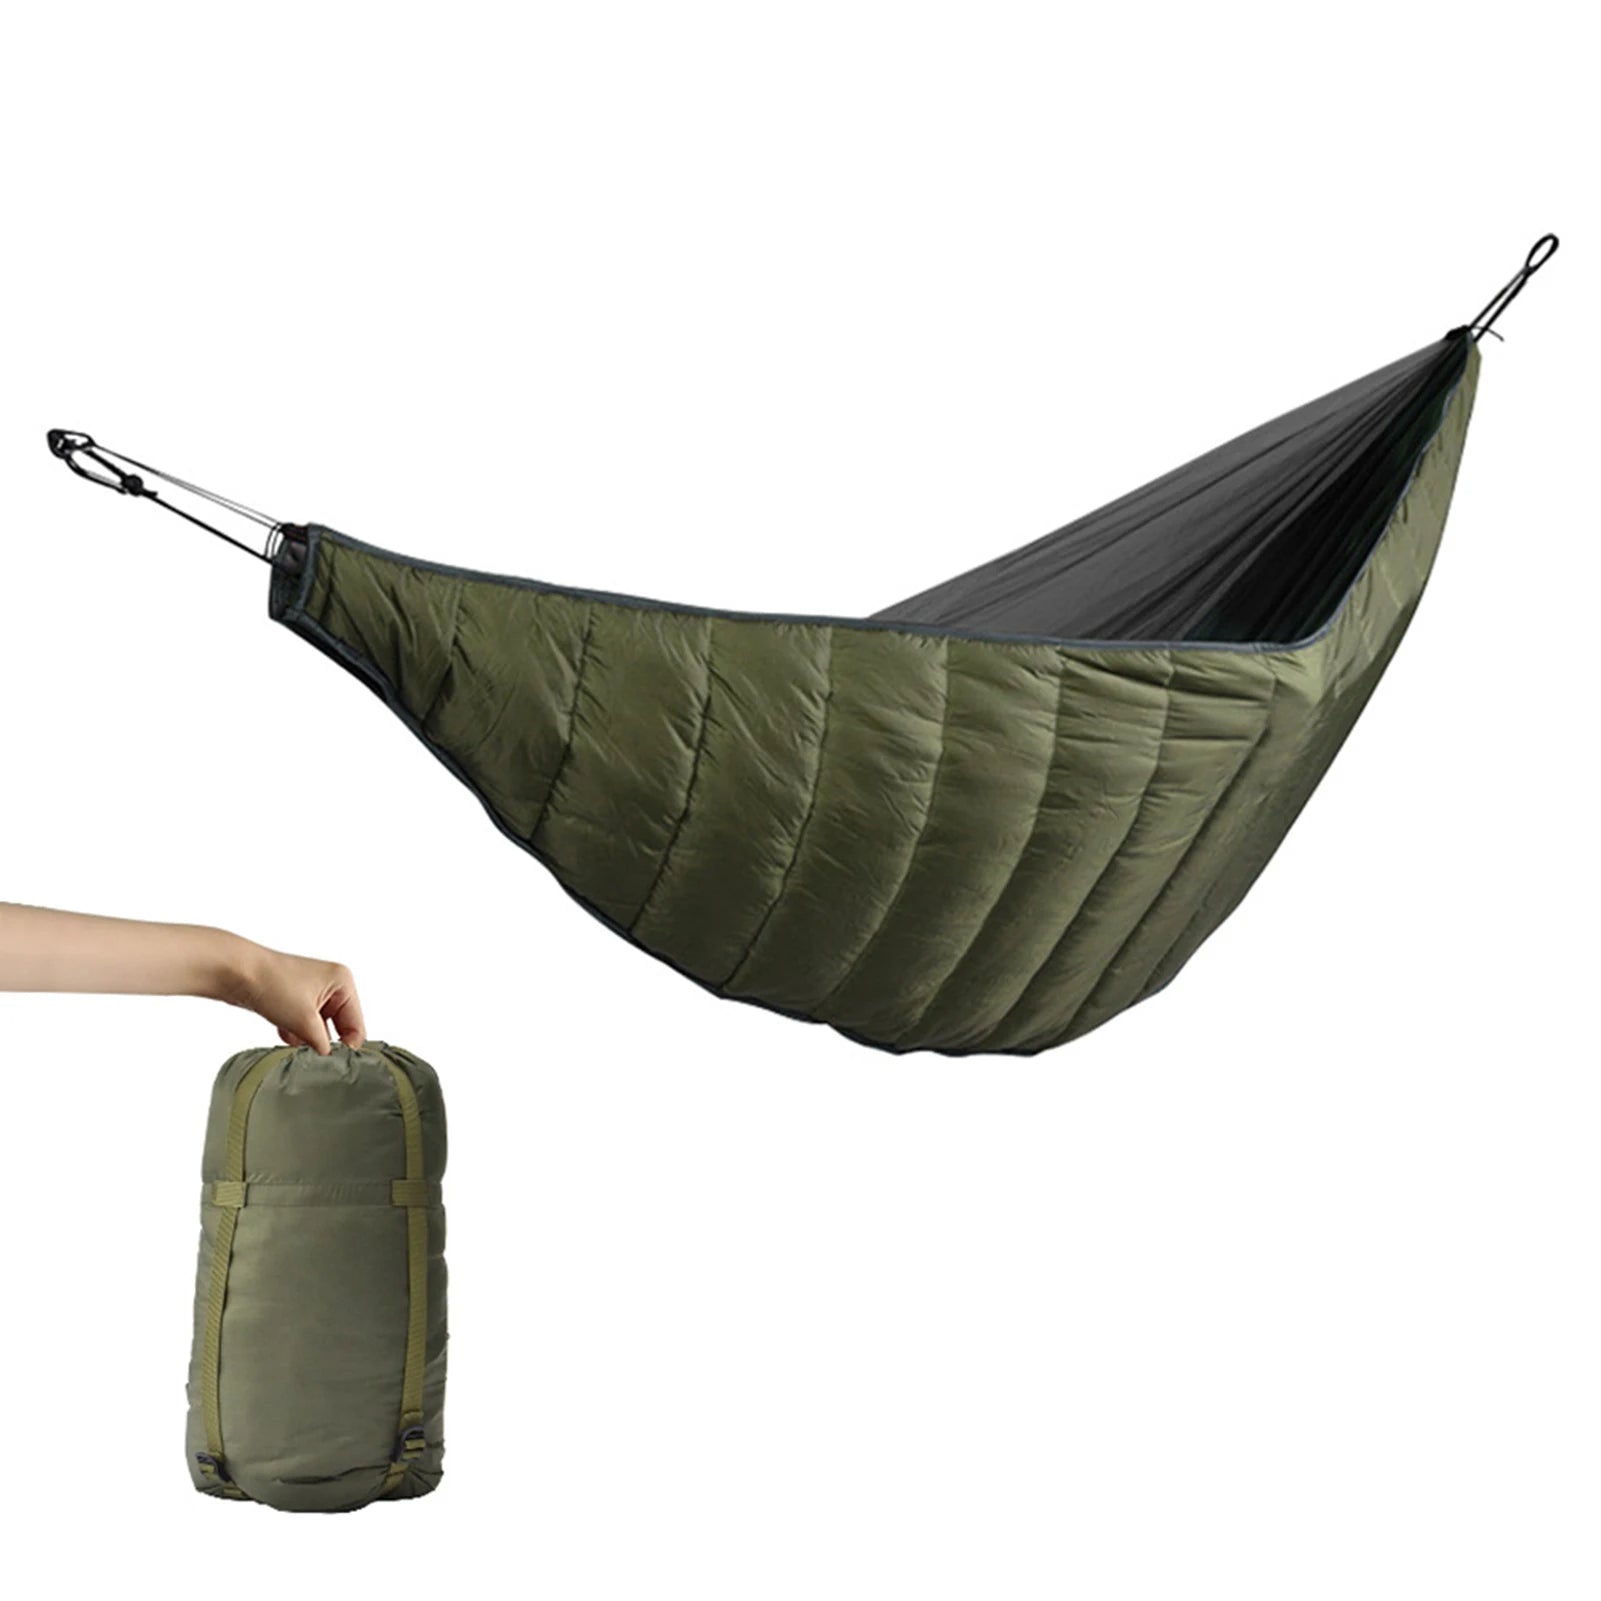 Camping Cotton Hammock: Portable Outdoor Warm Sleeping Bag, Multifunctional Hammock Blanket for Hiking, Picnics, and Relaxing in the Backyard or Patio